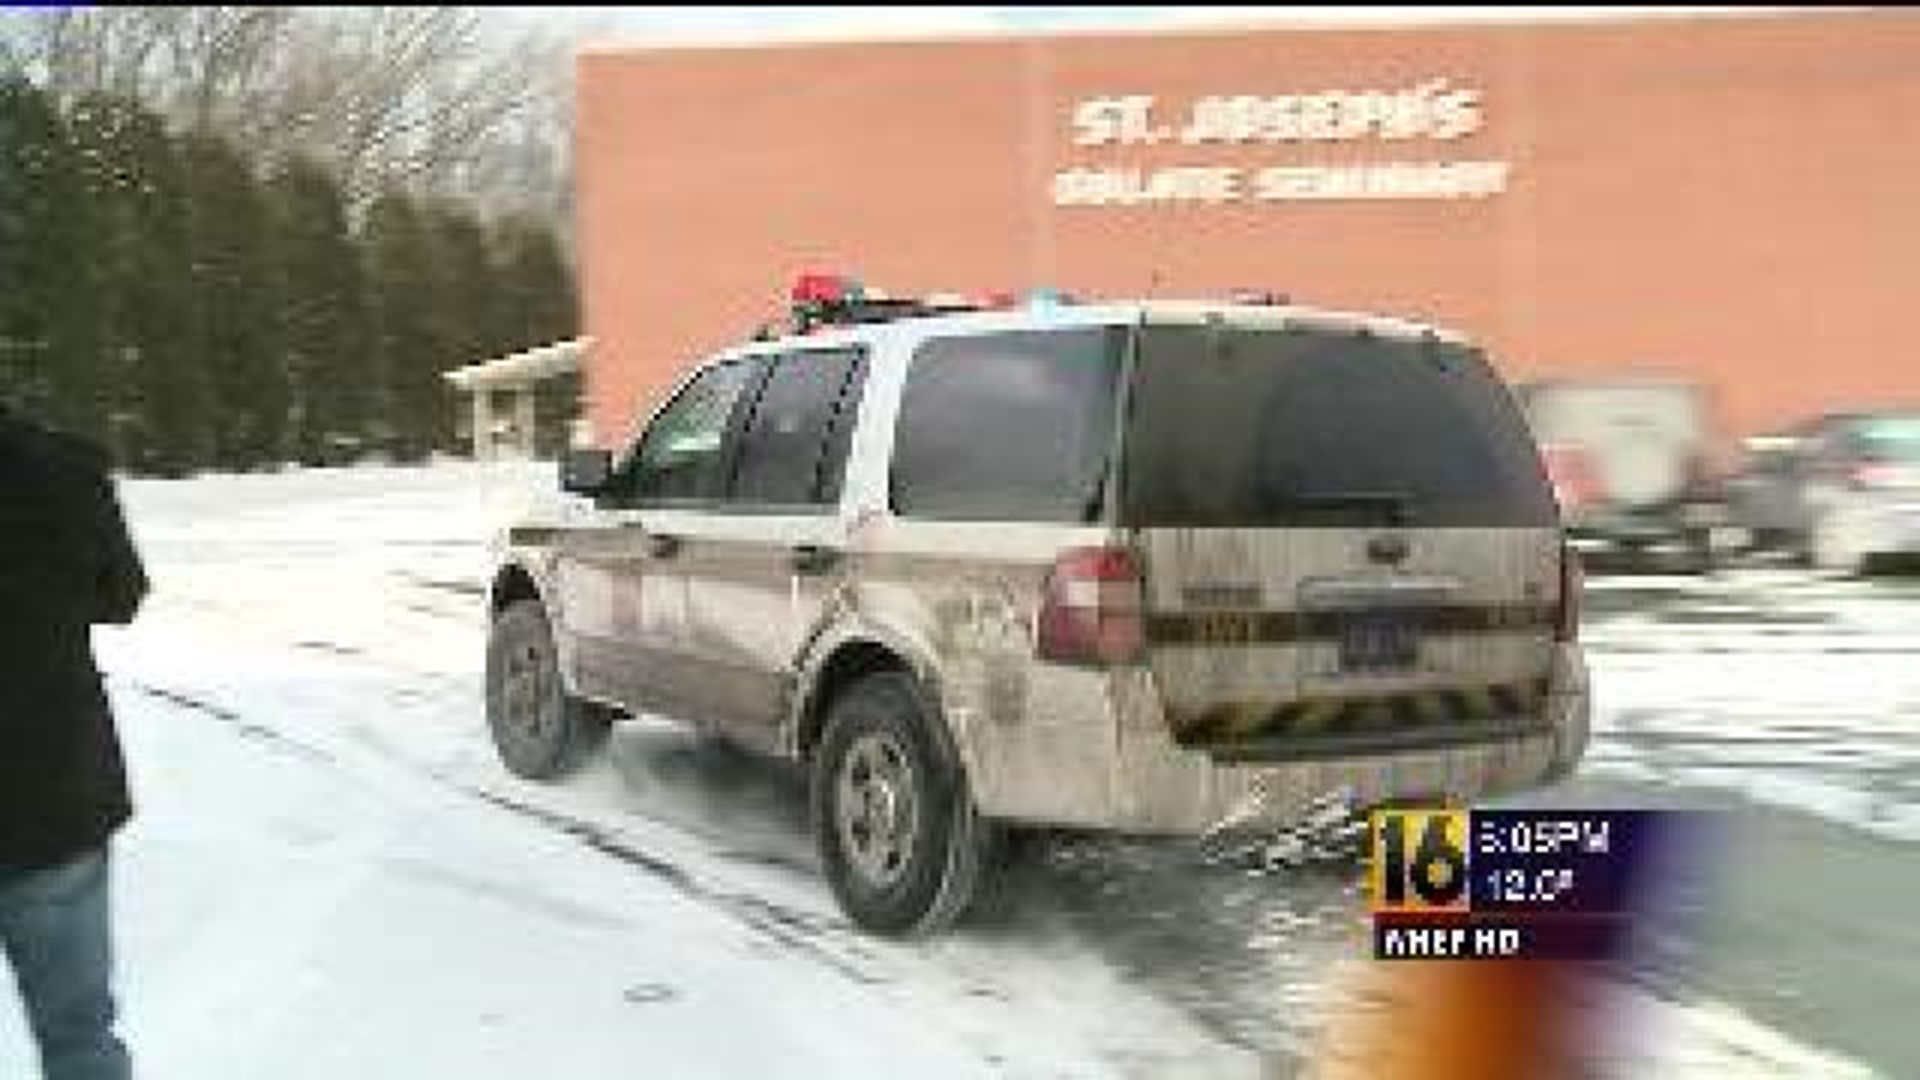 Suspicious Man Sparked Scare Inside Seminary in Luzerne County